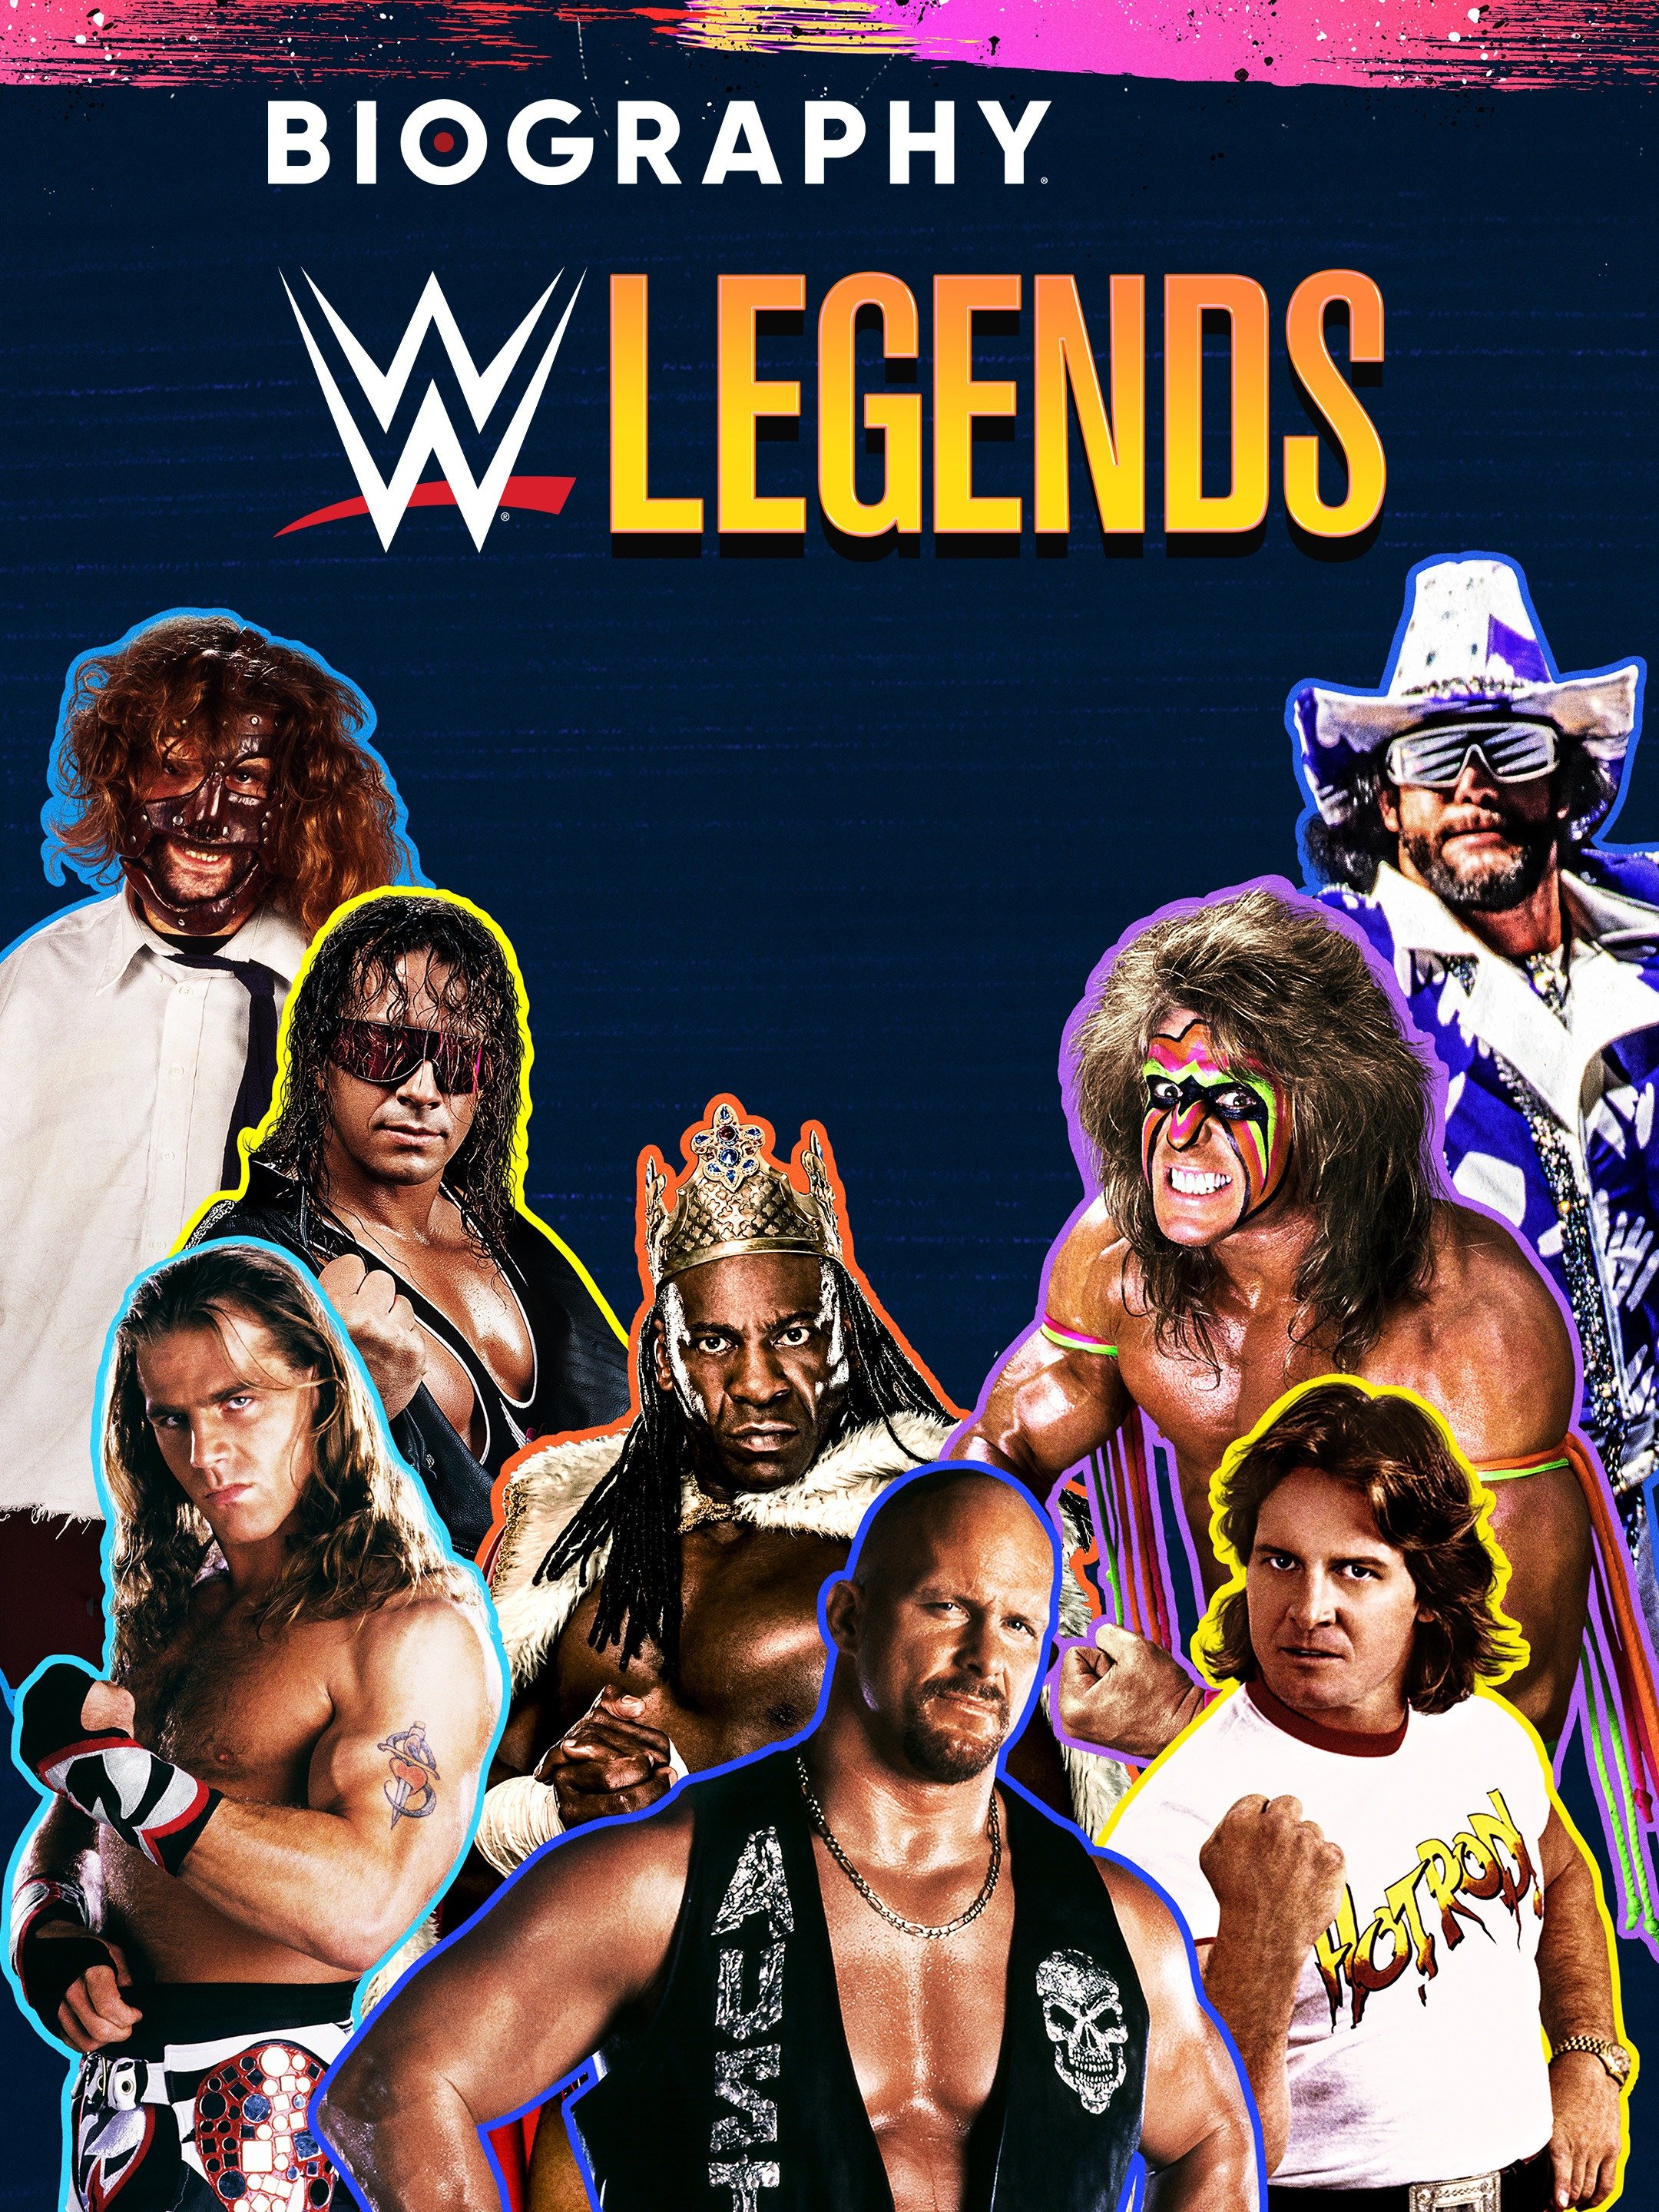 biography wwe legends on peacock